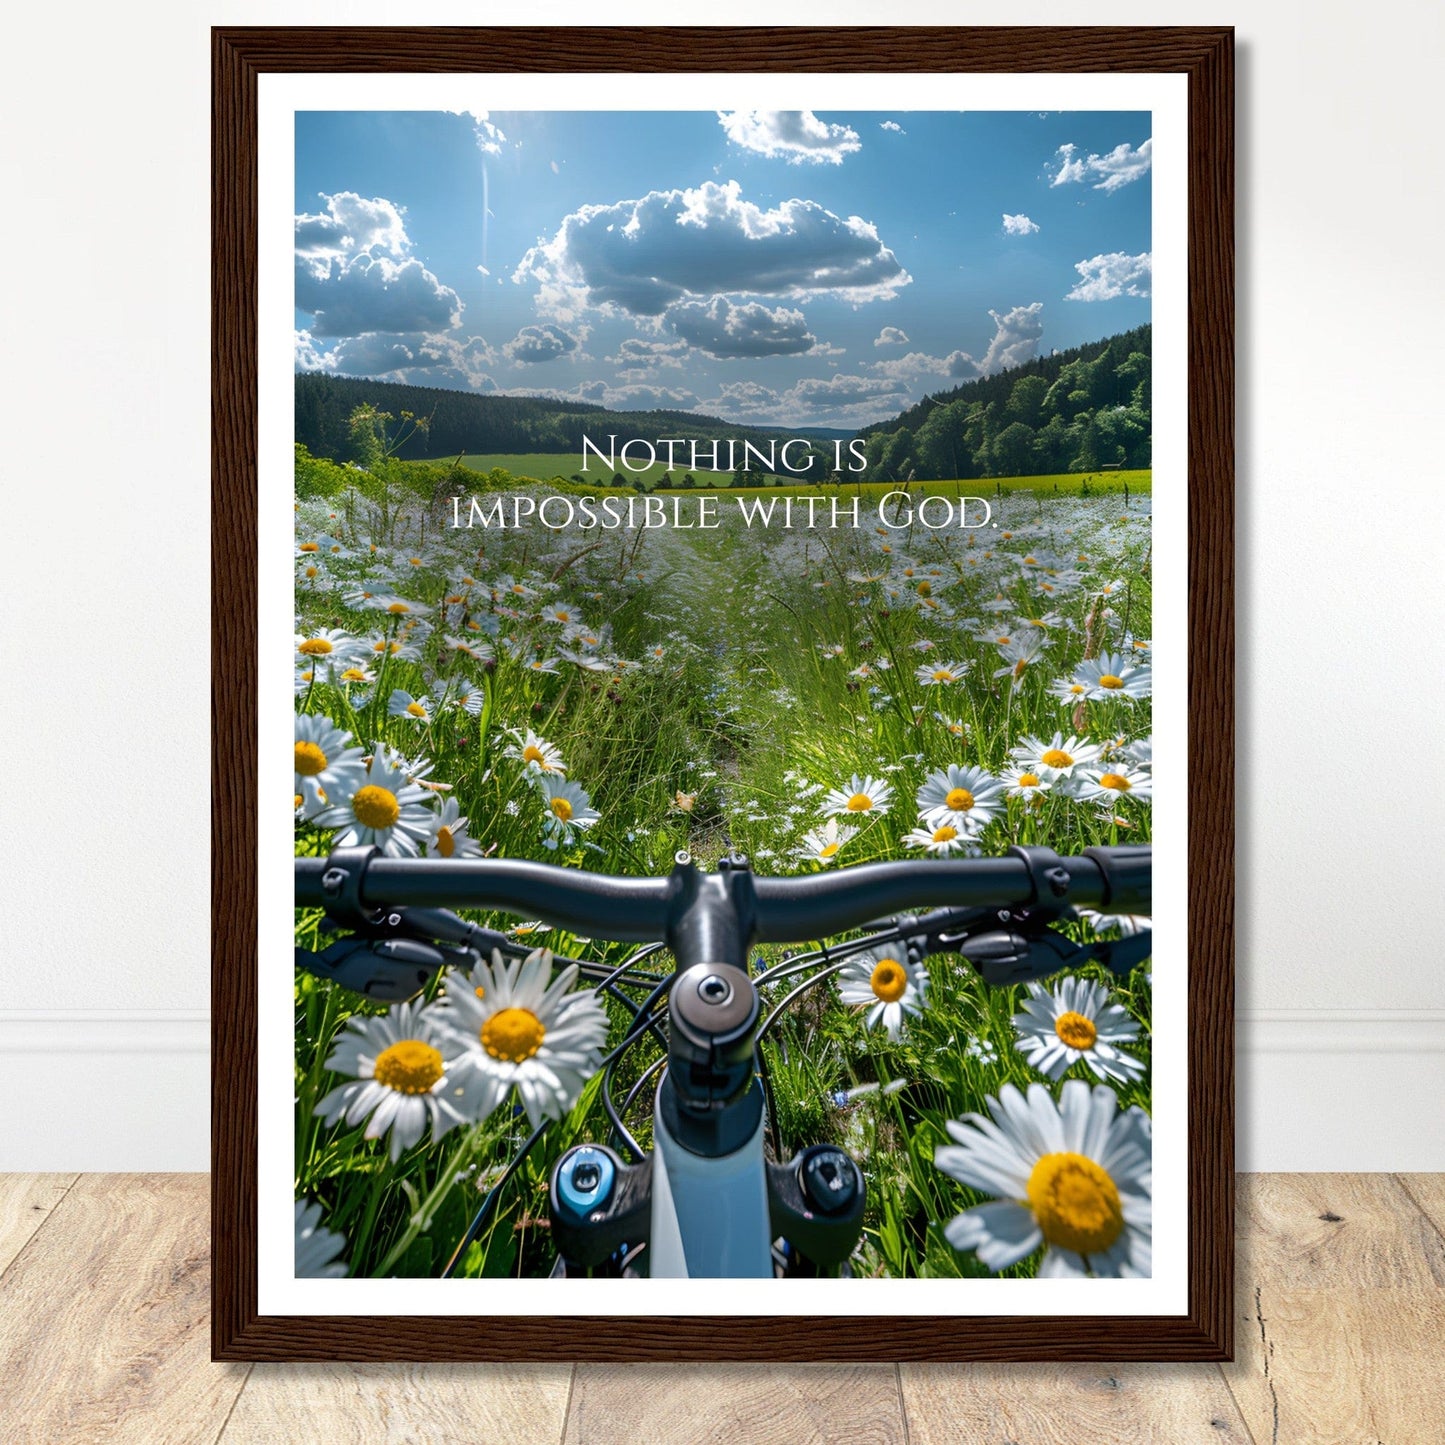 Coffee With My Father Print Material 30x40 cm / 12x16″ / Premium Matte Paper Wooden Framed Poster / Dark wood frame Nothing is Impossible With God - Artwork